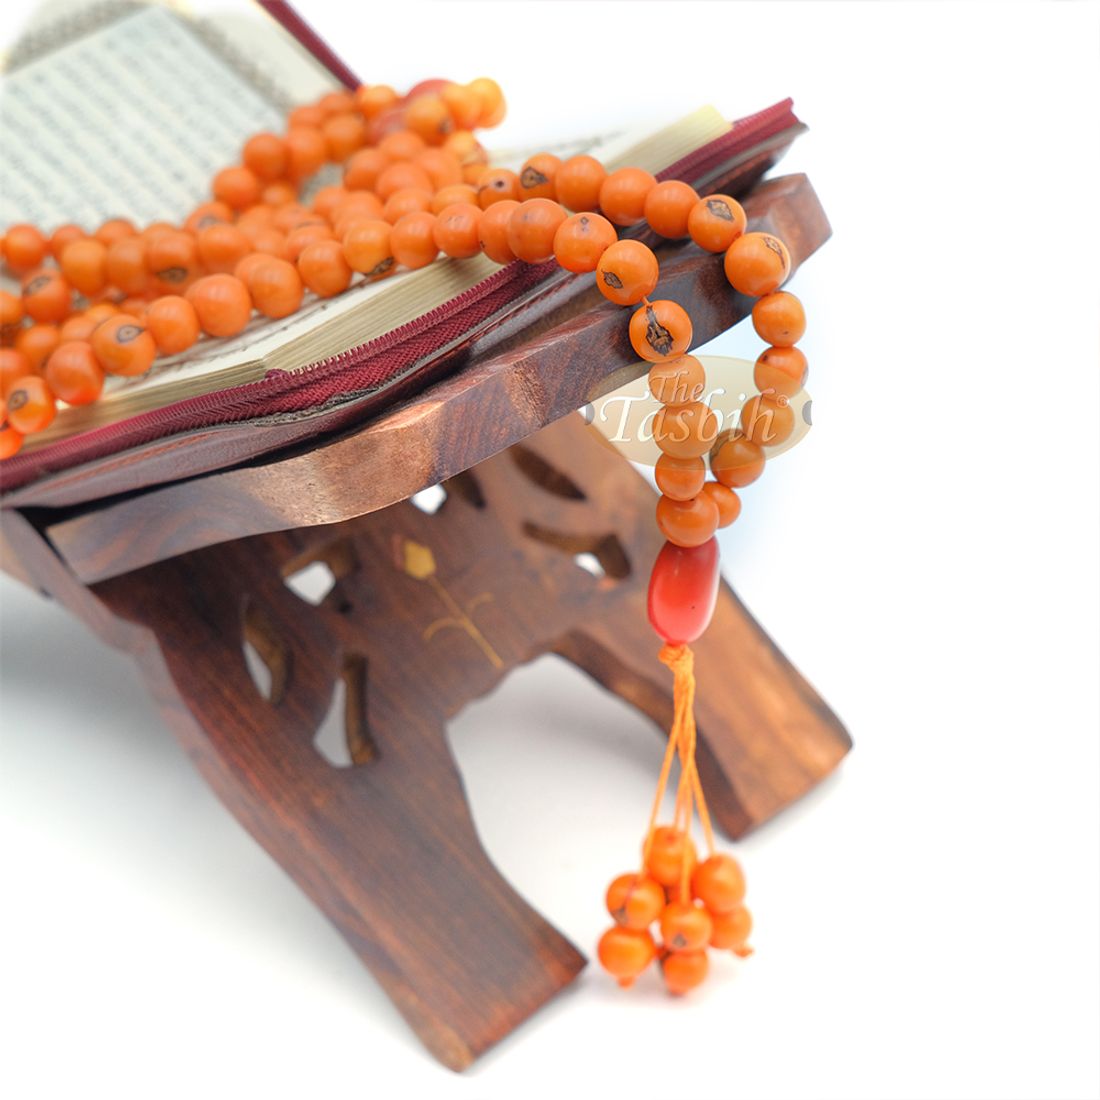 Orange Natural Colored Dye Eco-friendly Sustainable Original Açai Seed 9mm Beads Traditional Tasbih